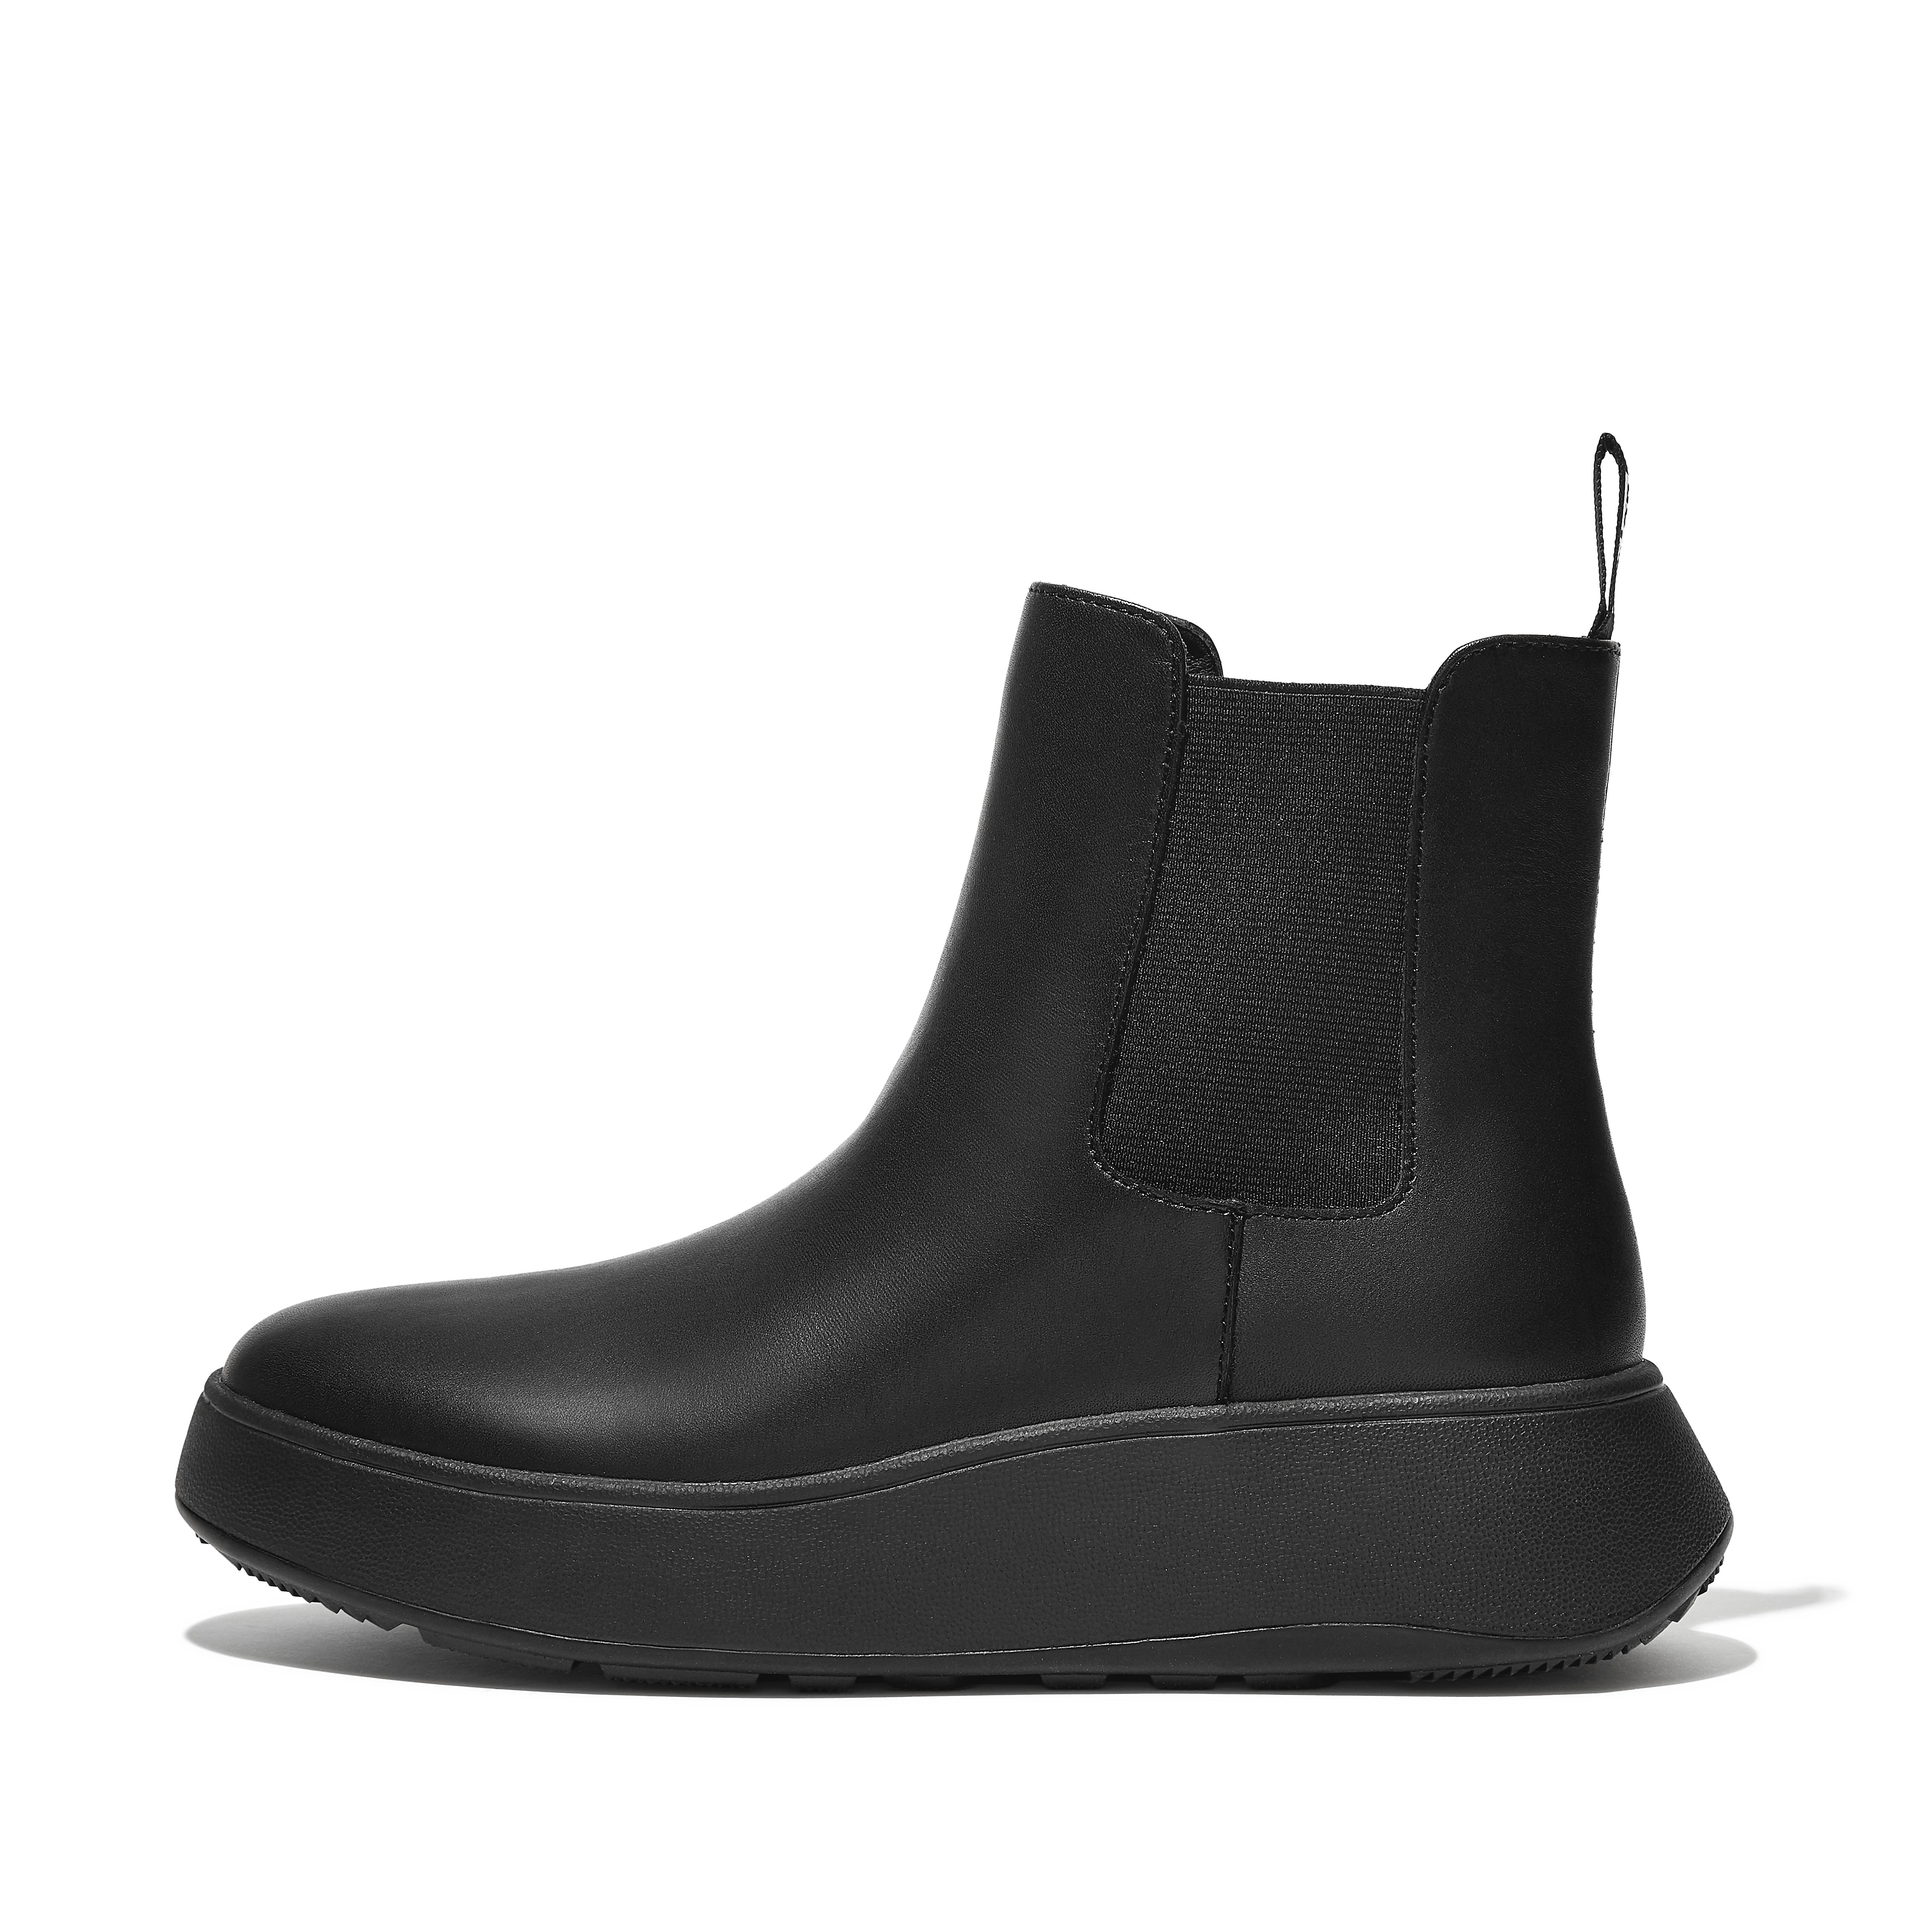 Women's F-Mode Leather Flatform Chelsea Boots | FitFlop UK